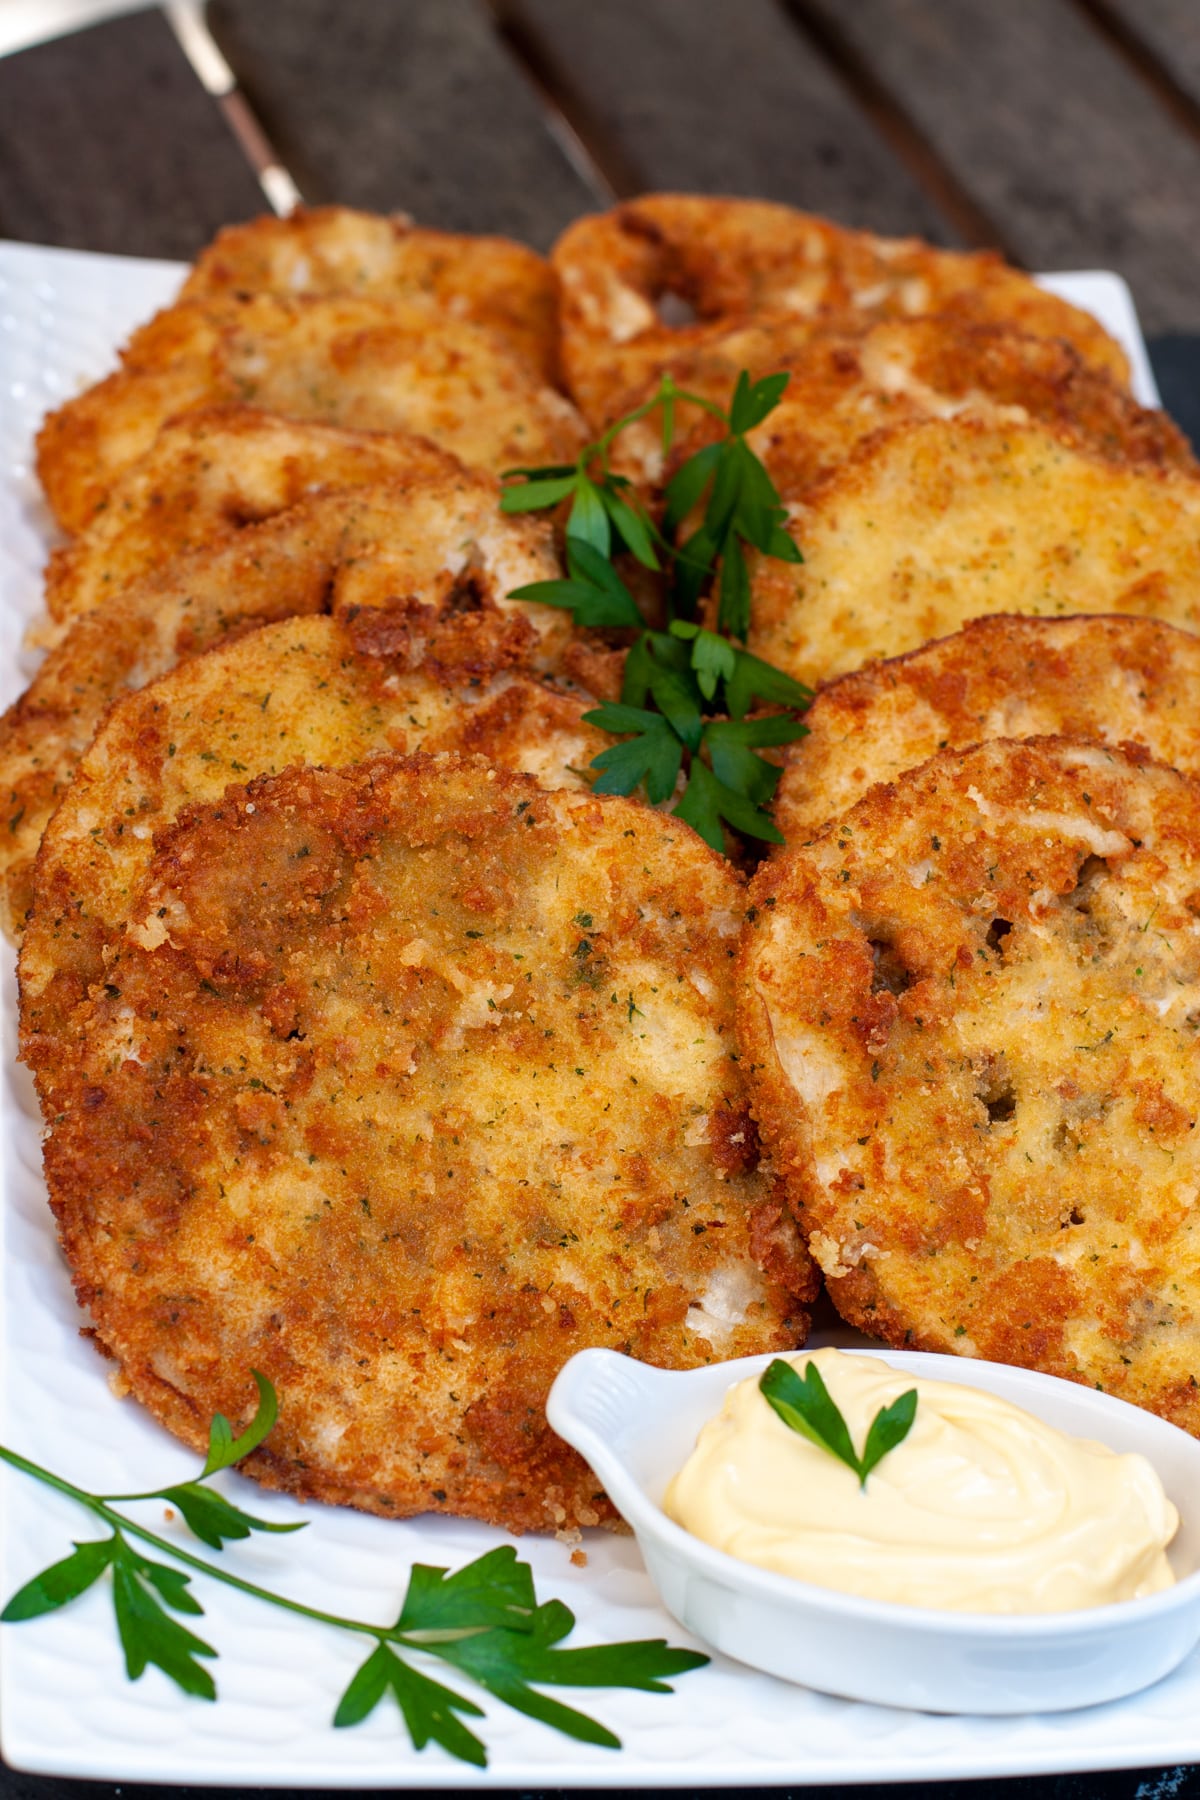 Fried eggplant milanese served with aioli